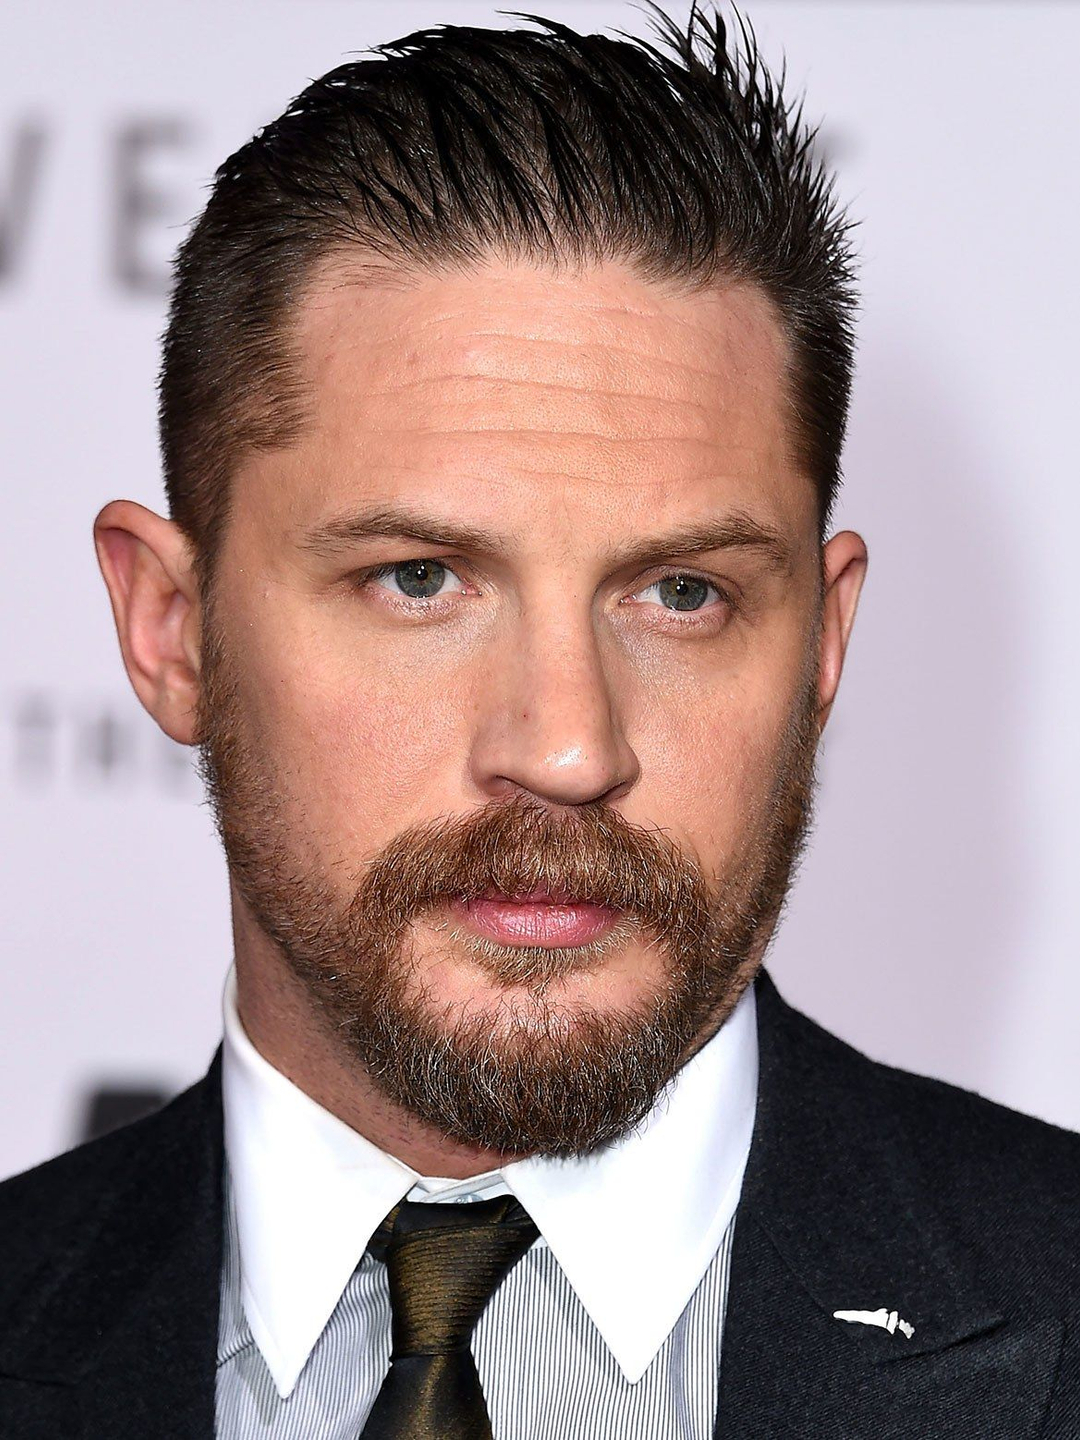 Tom Hardy current look